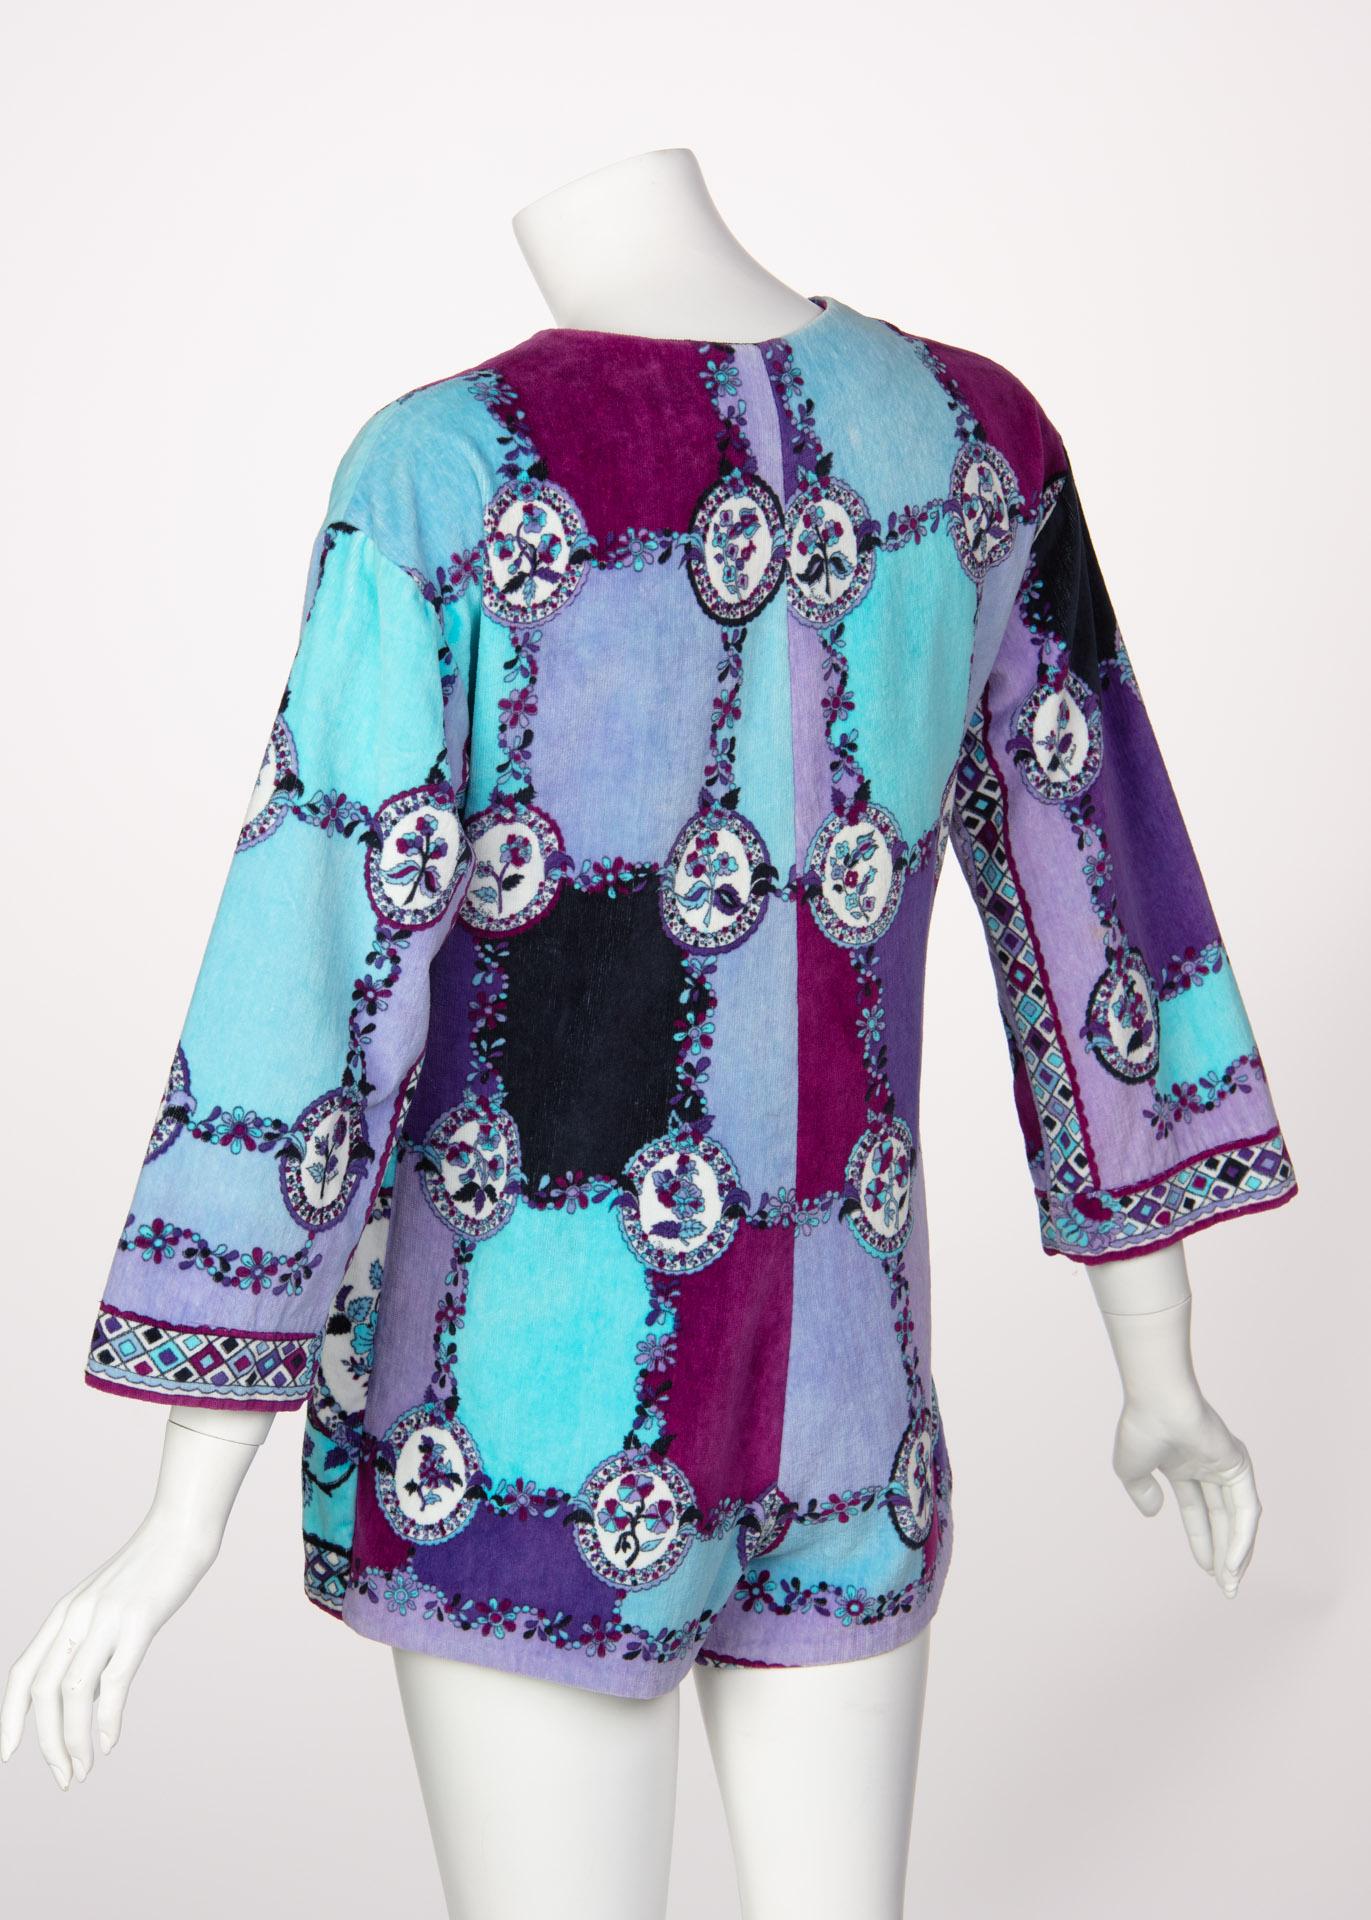 1960s Emilio Pucci Purple Turquoise Velvet Terry Romper Cover-Up For ...